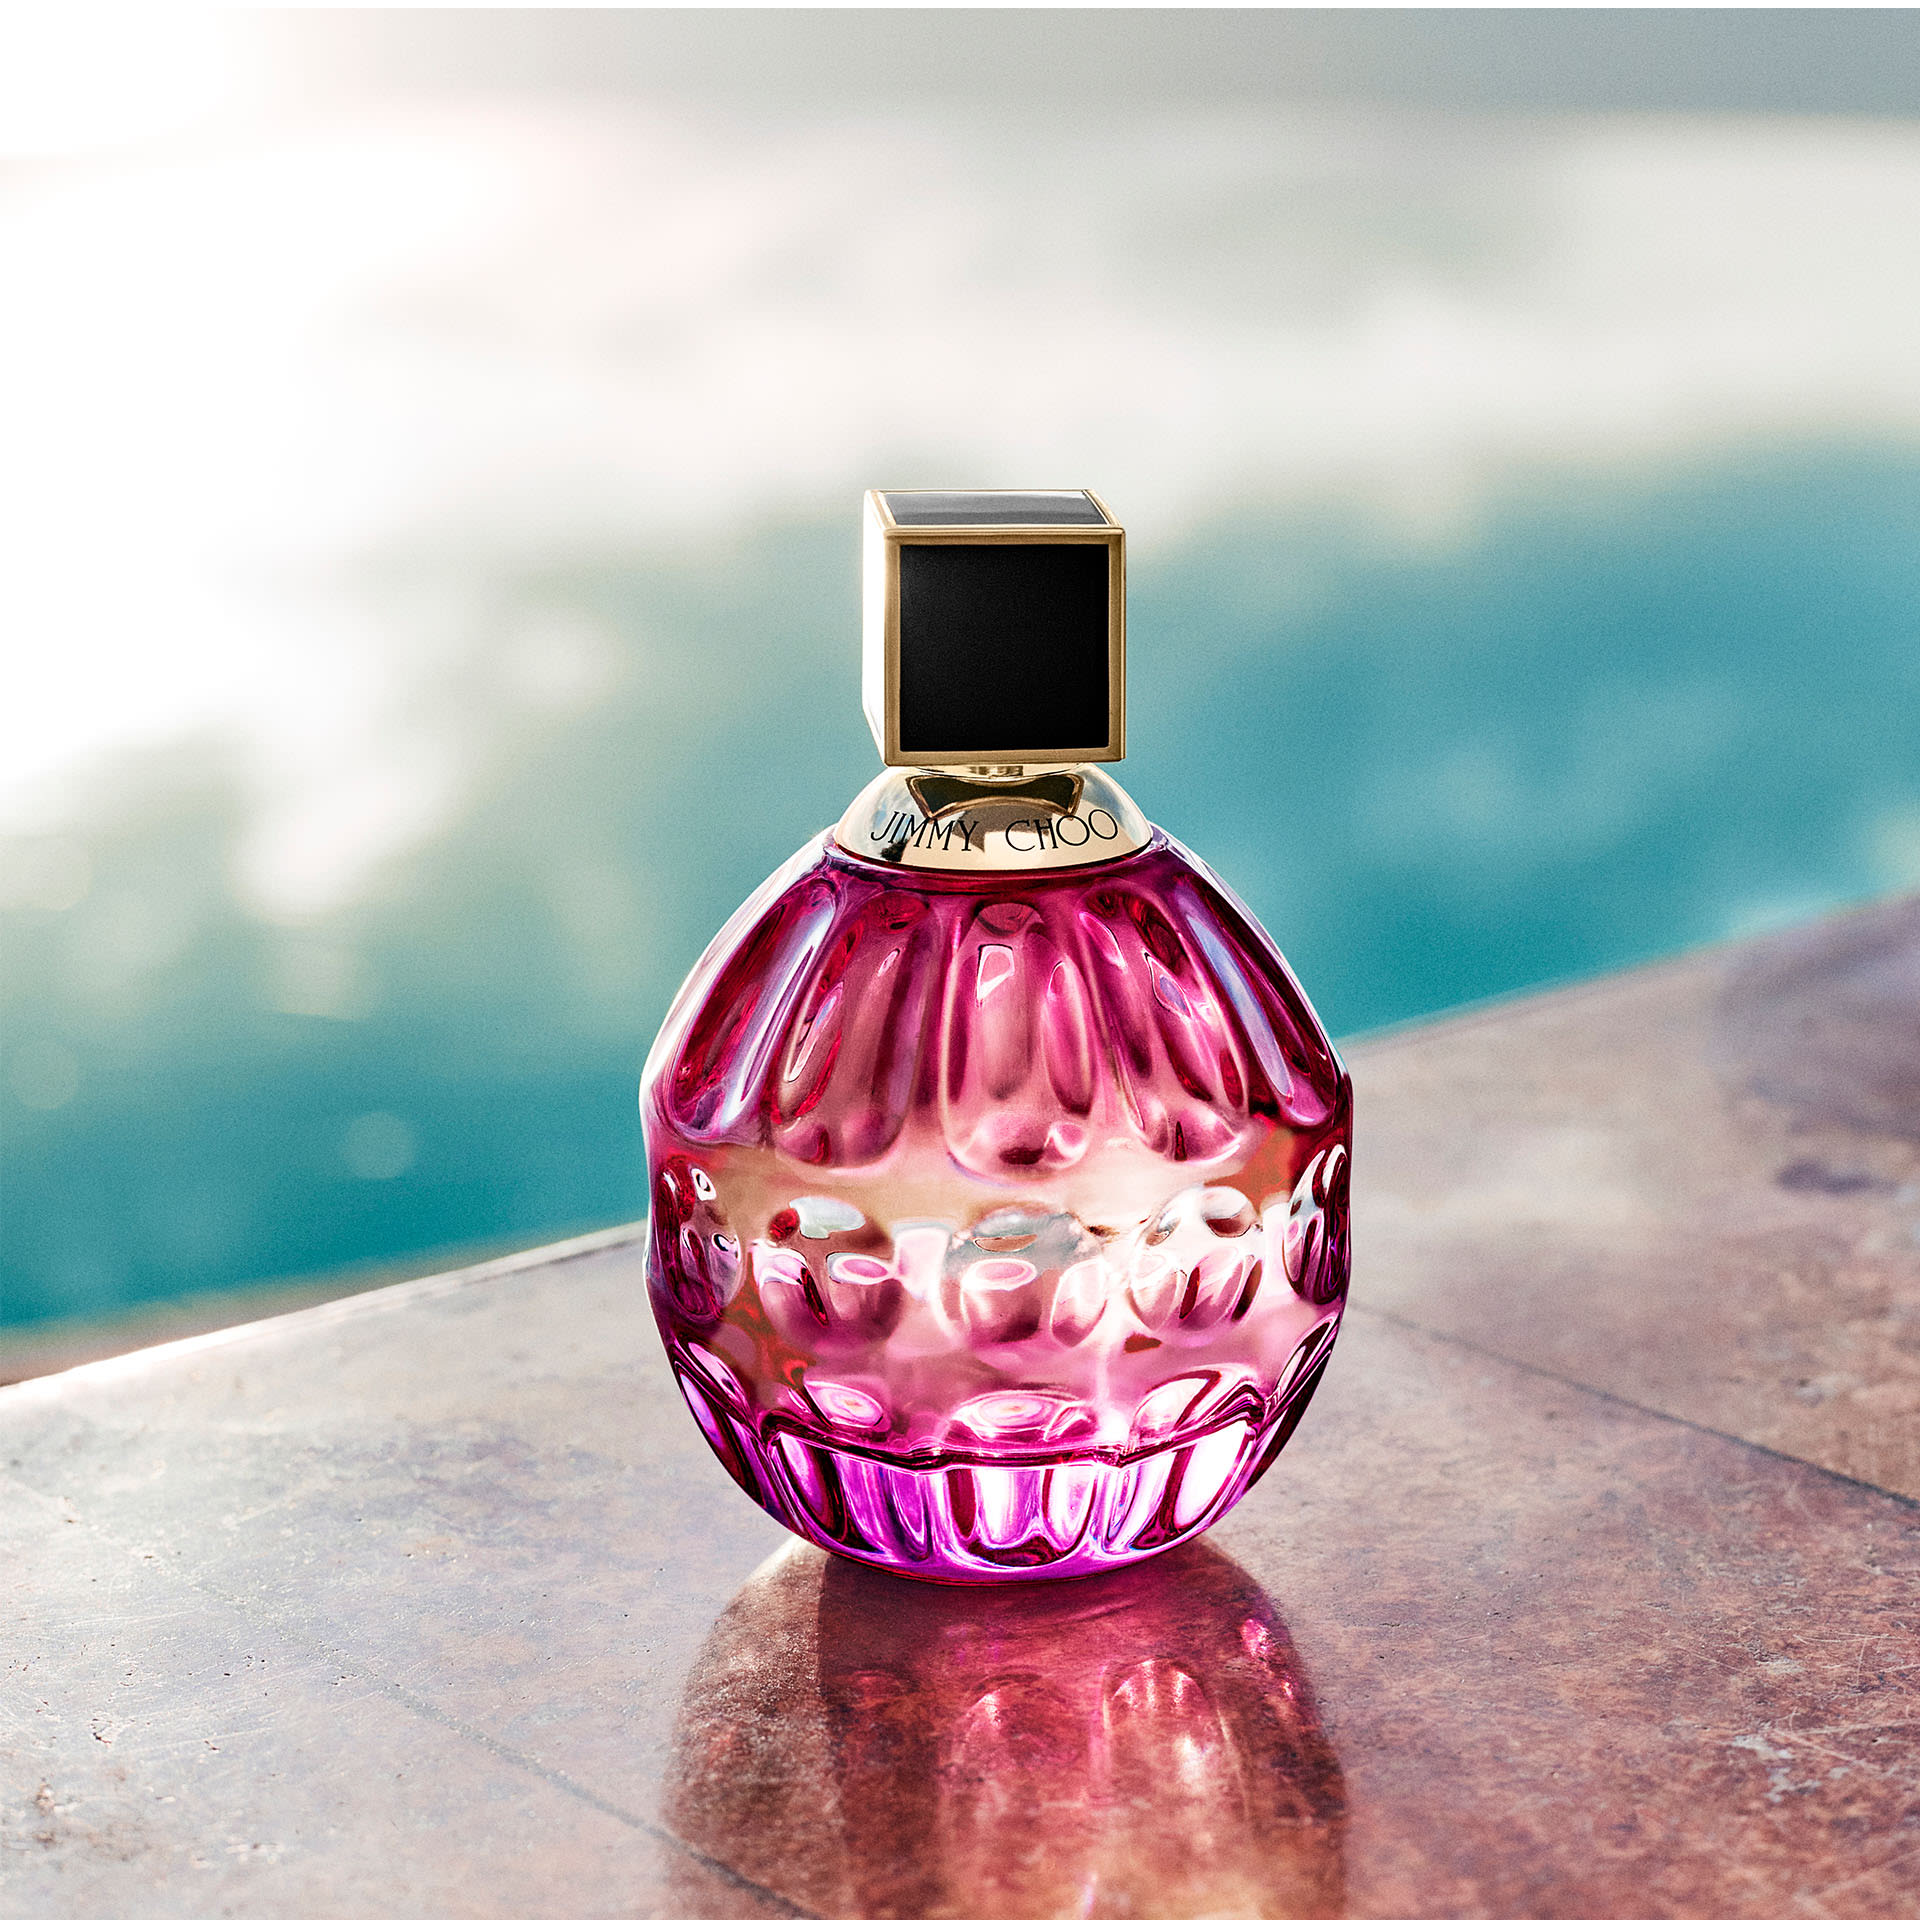 Introducing Rose Passion, The New Fragrance